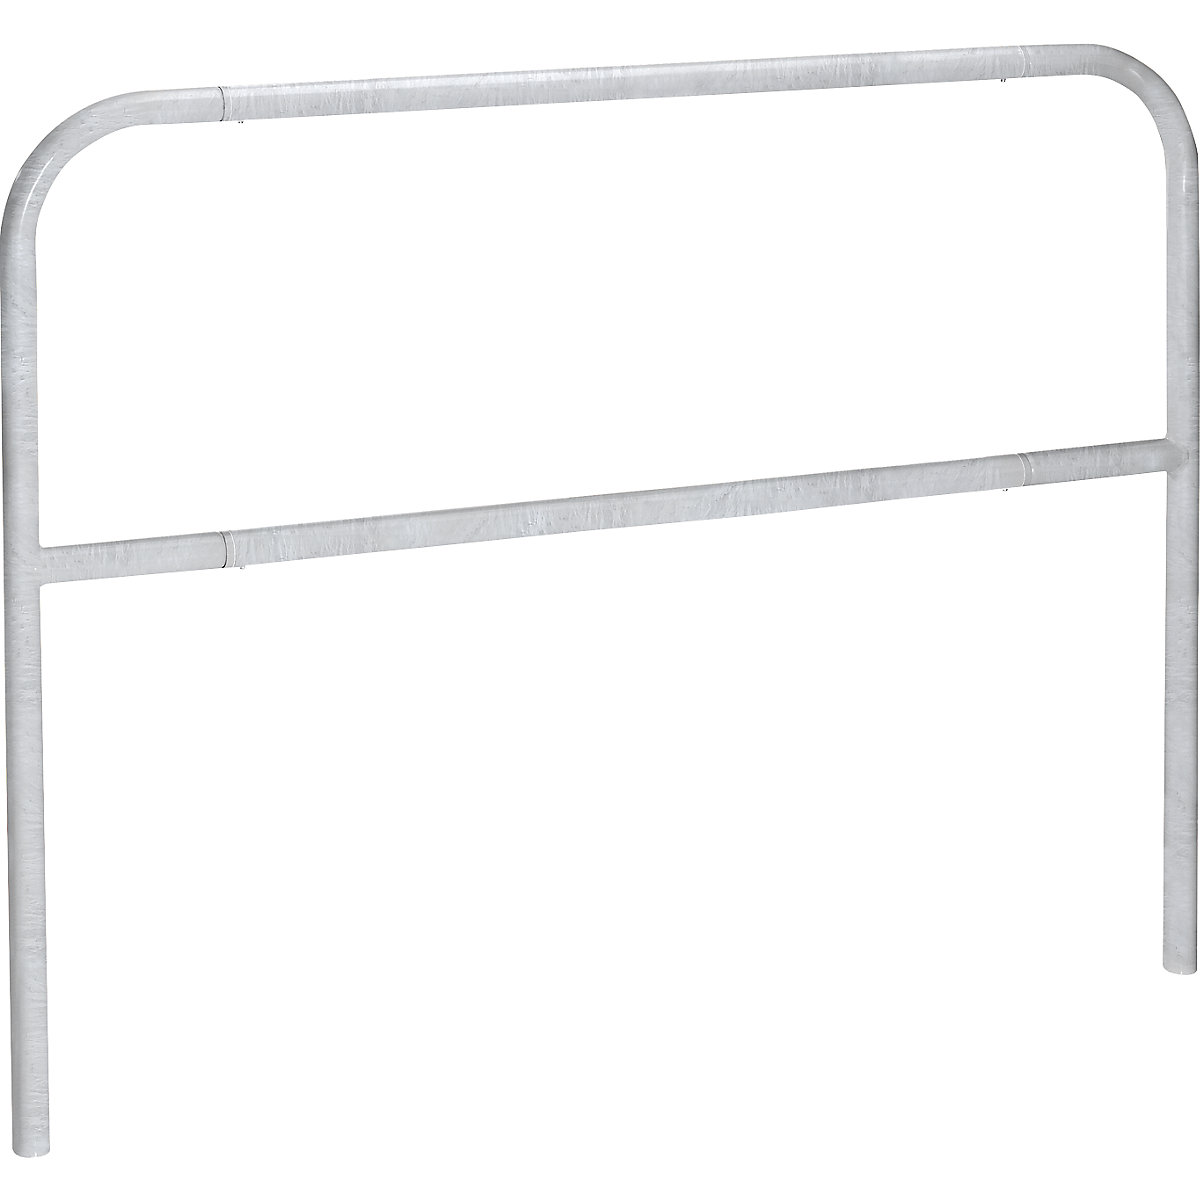 Crash protection bar, for setting in concrete, width 1500 mm, zinc plated-14